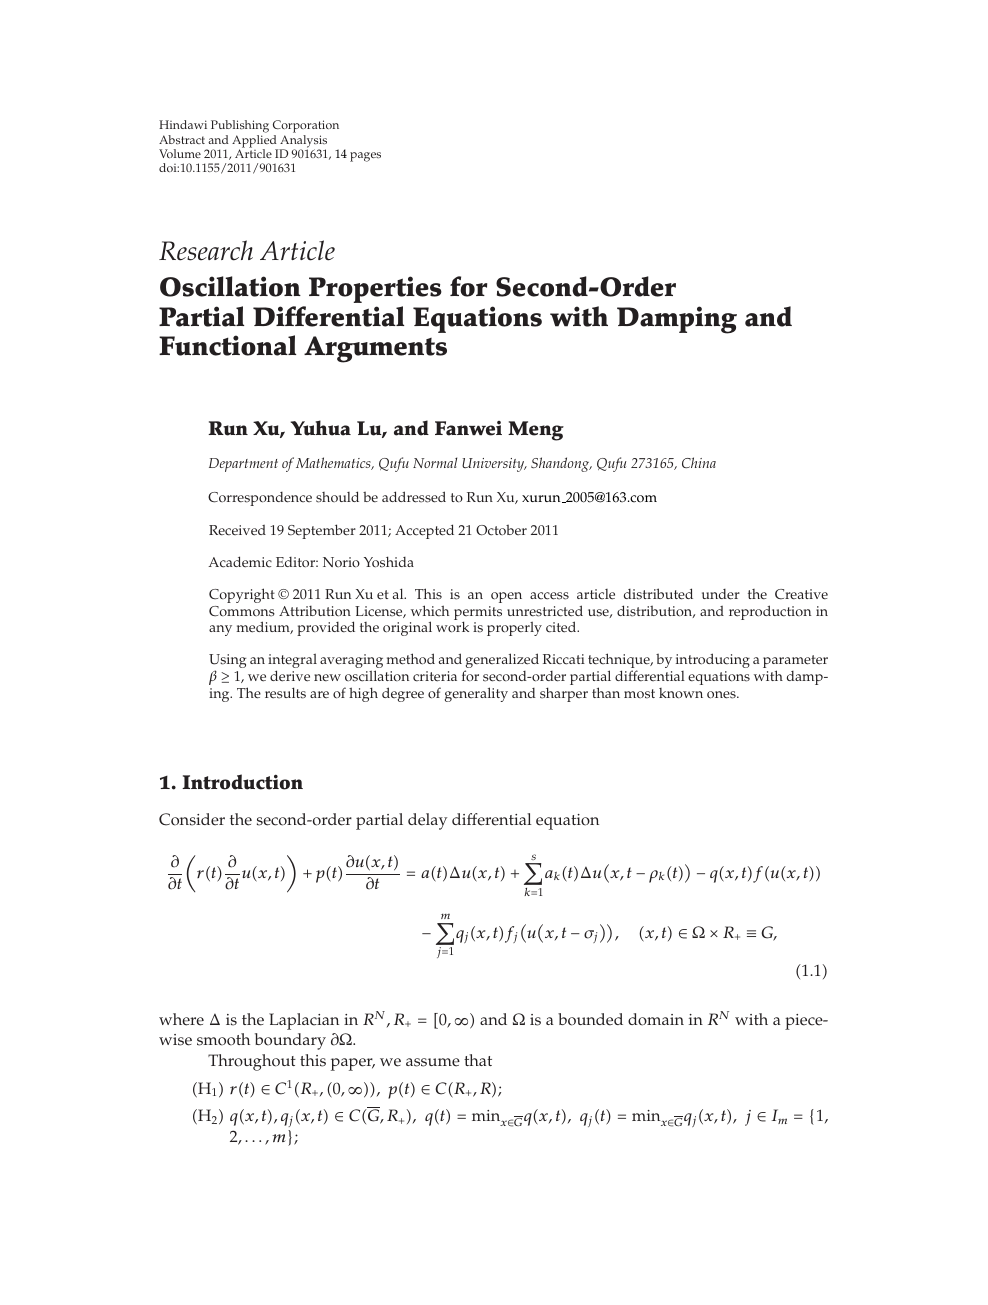 Oscillation Properties For Second Order Partial Differential Equations With Damping And Functional Arguments Topic Of Research Paper In Mathematics Download Scholarly Article Pdf And Read For Free On Cyberleninka Open Science Hub